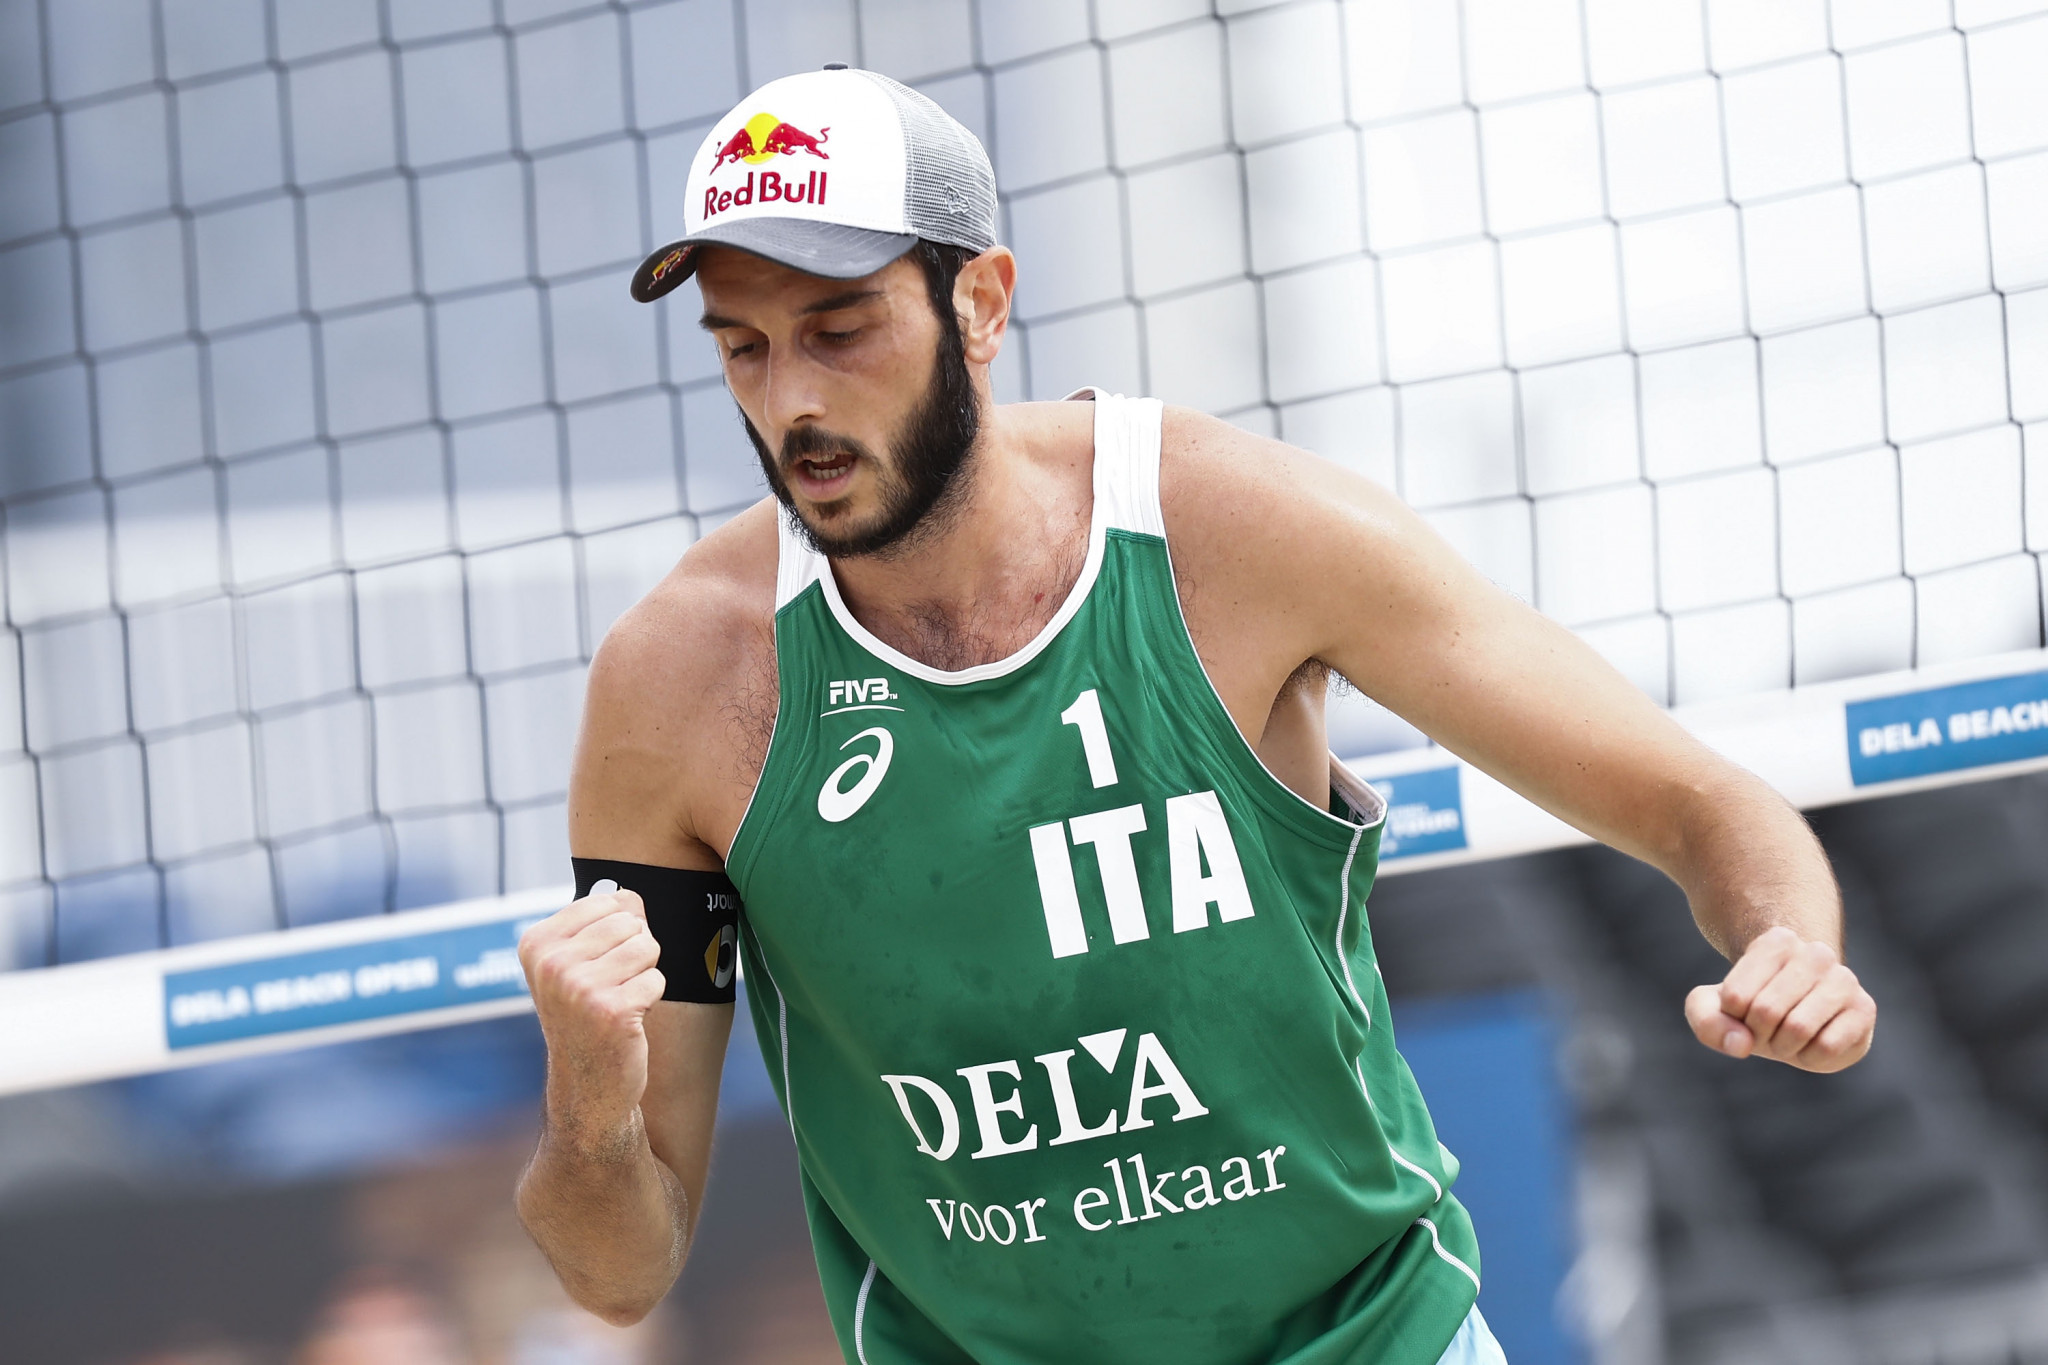 Paolo Nicolai and Daniele Lupo began their title defence at the Beach Volleyball European Championships with a victory ©Getty Images